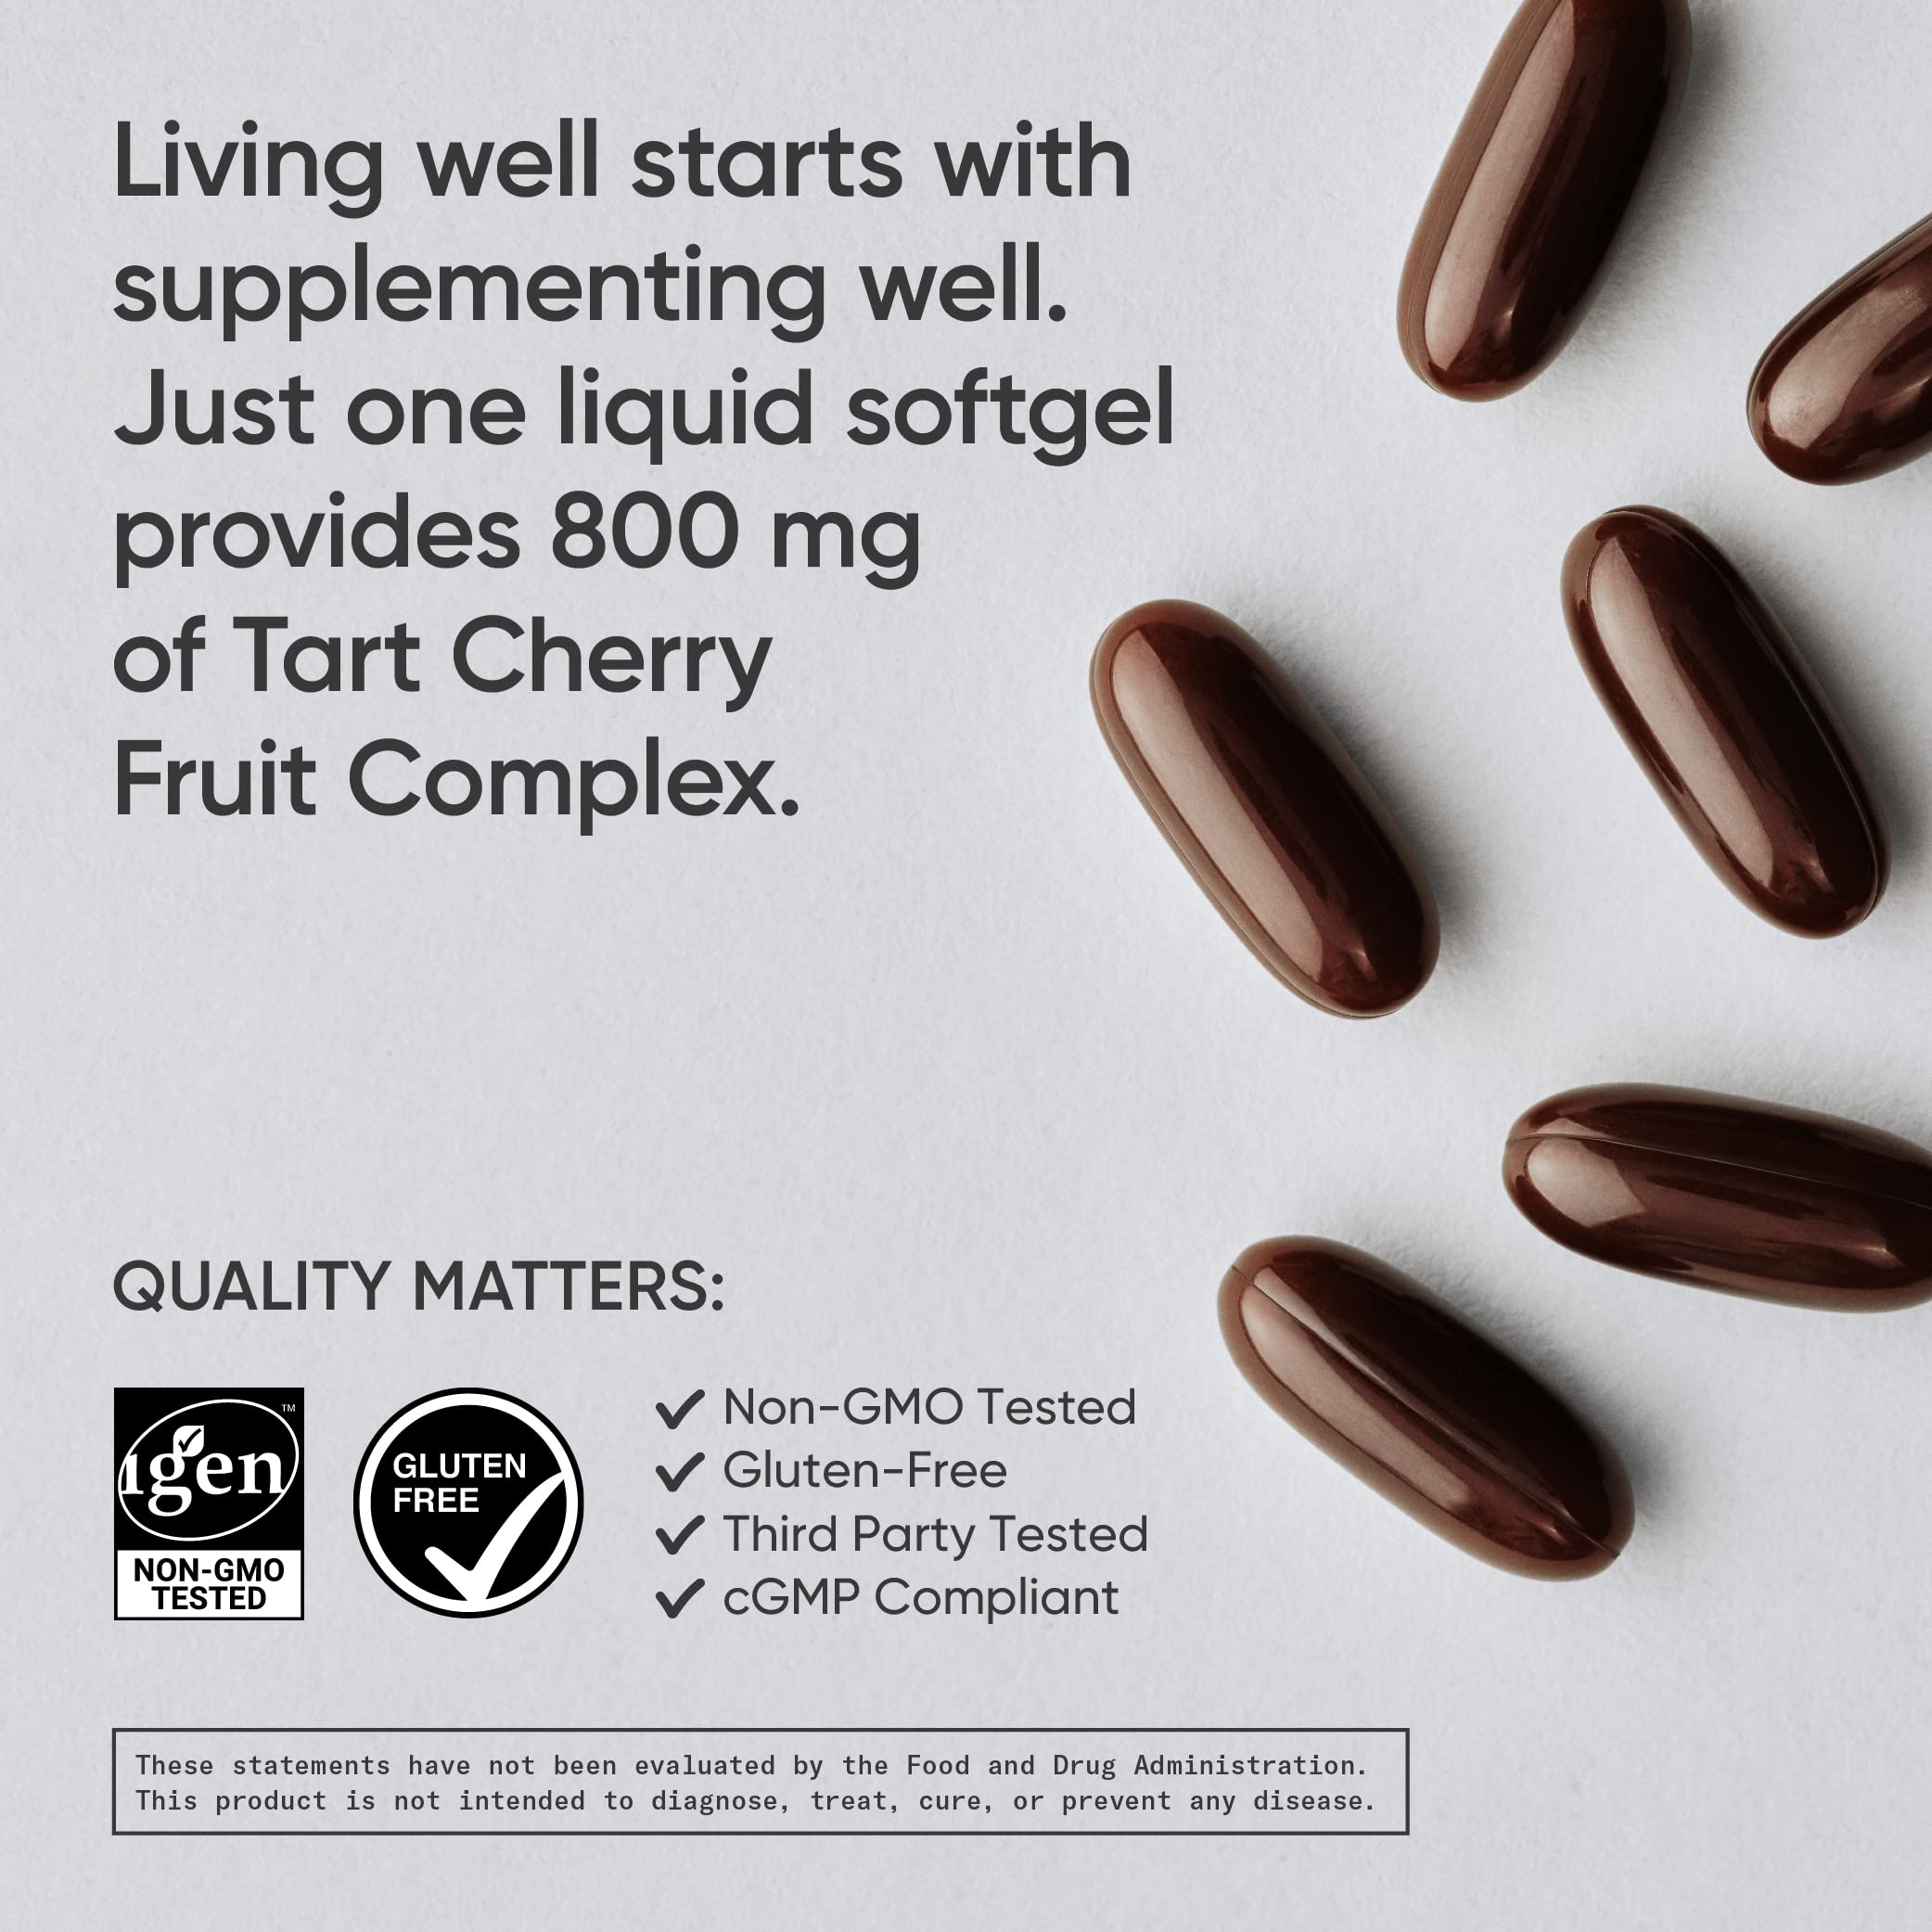 Sports Research Tart Cherry Concentrate - Made from Montmorency Tart Cherries 60 Liquid Softgels